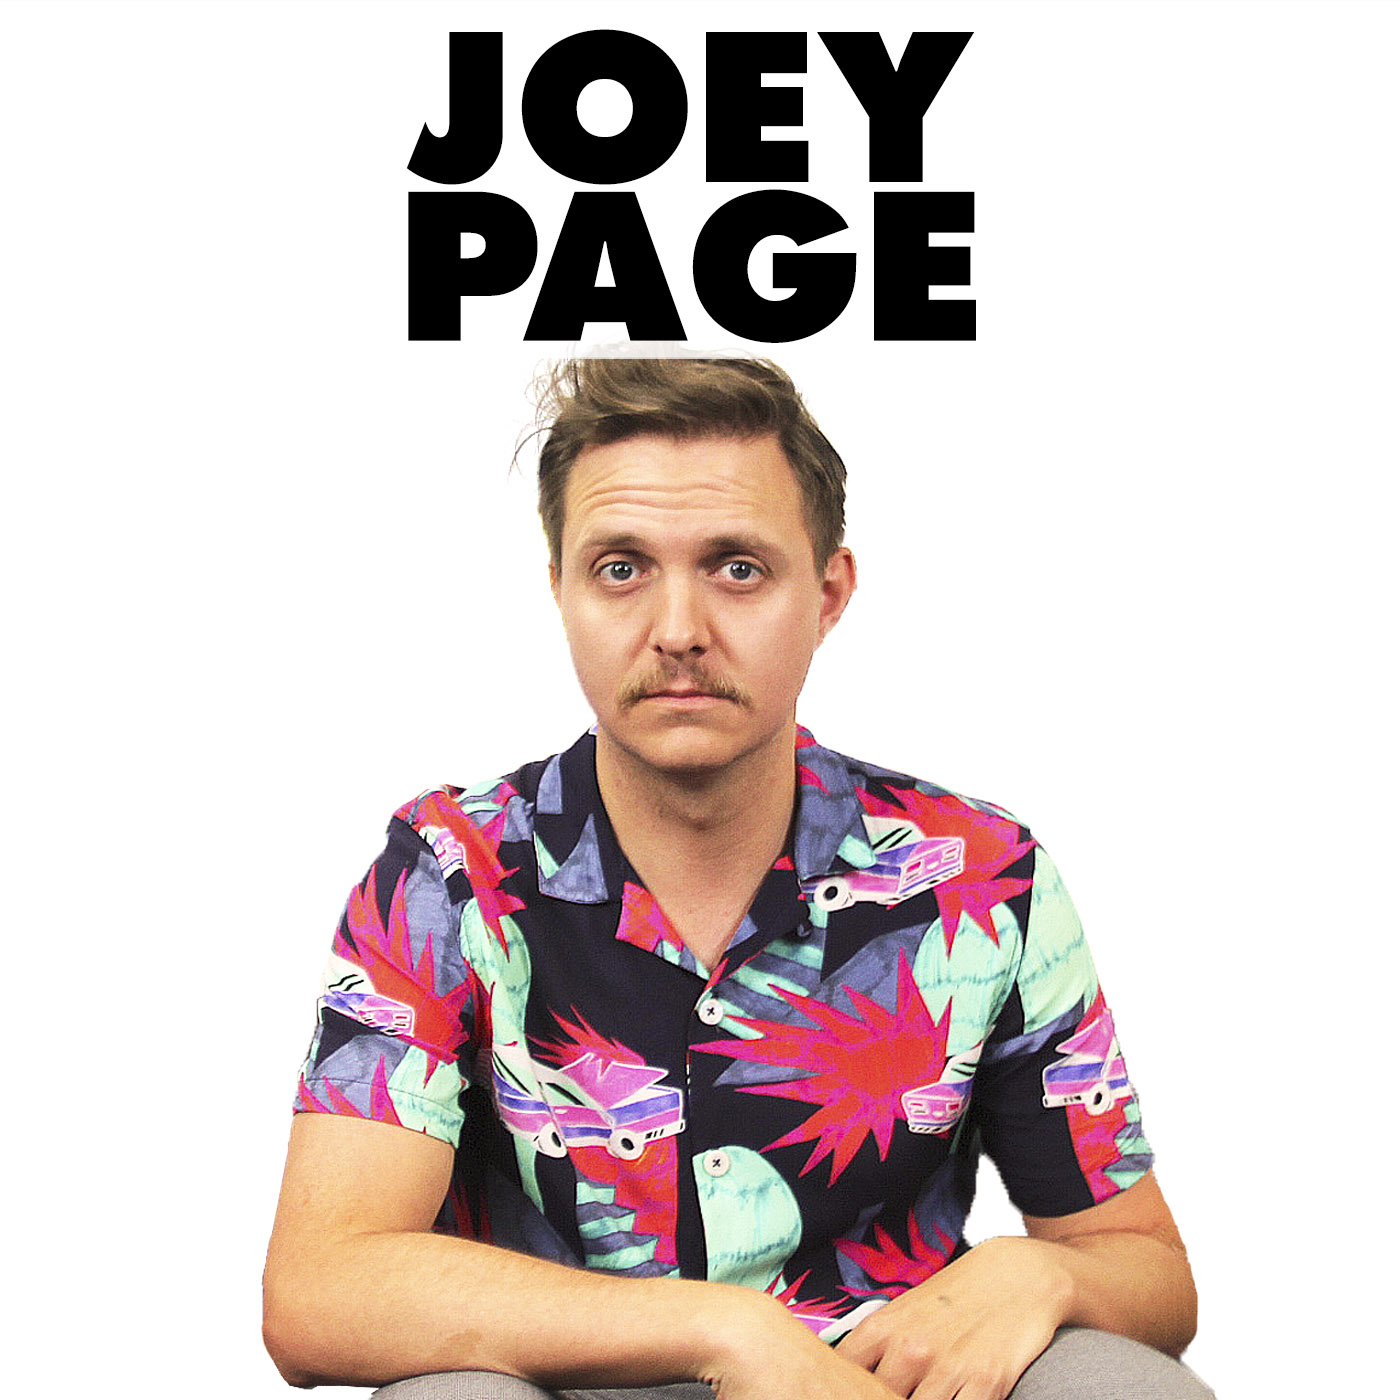 Joey Page